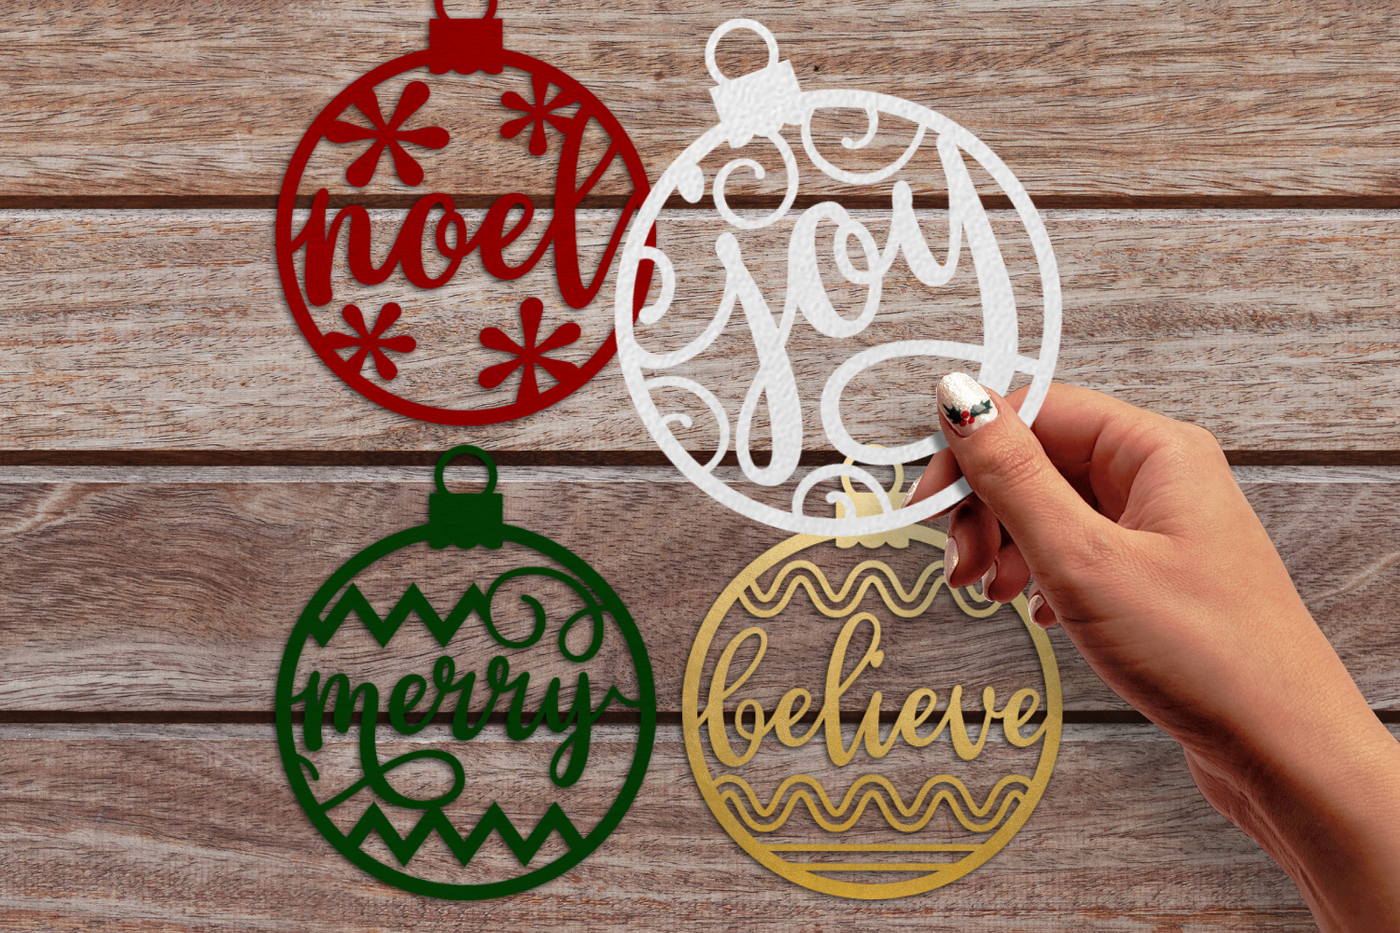 Papercut Christmas ornaments with the words "joy," "noel," "merry," and "believe."